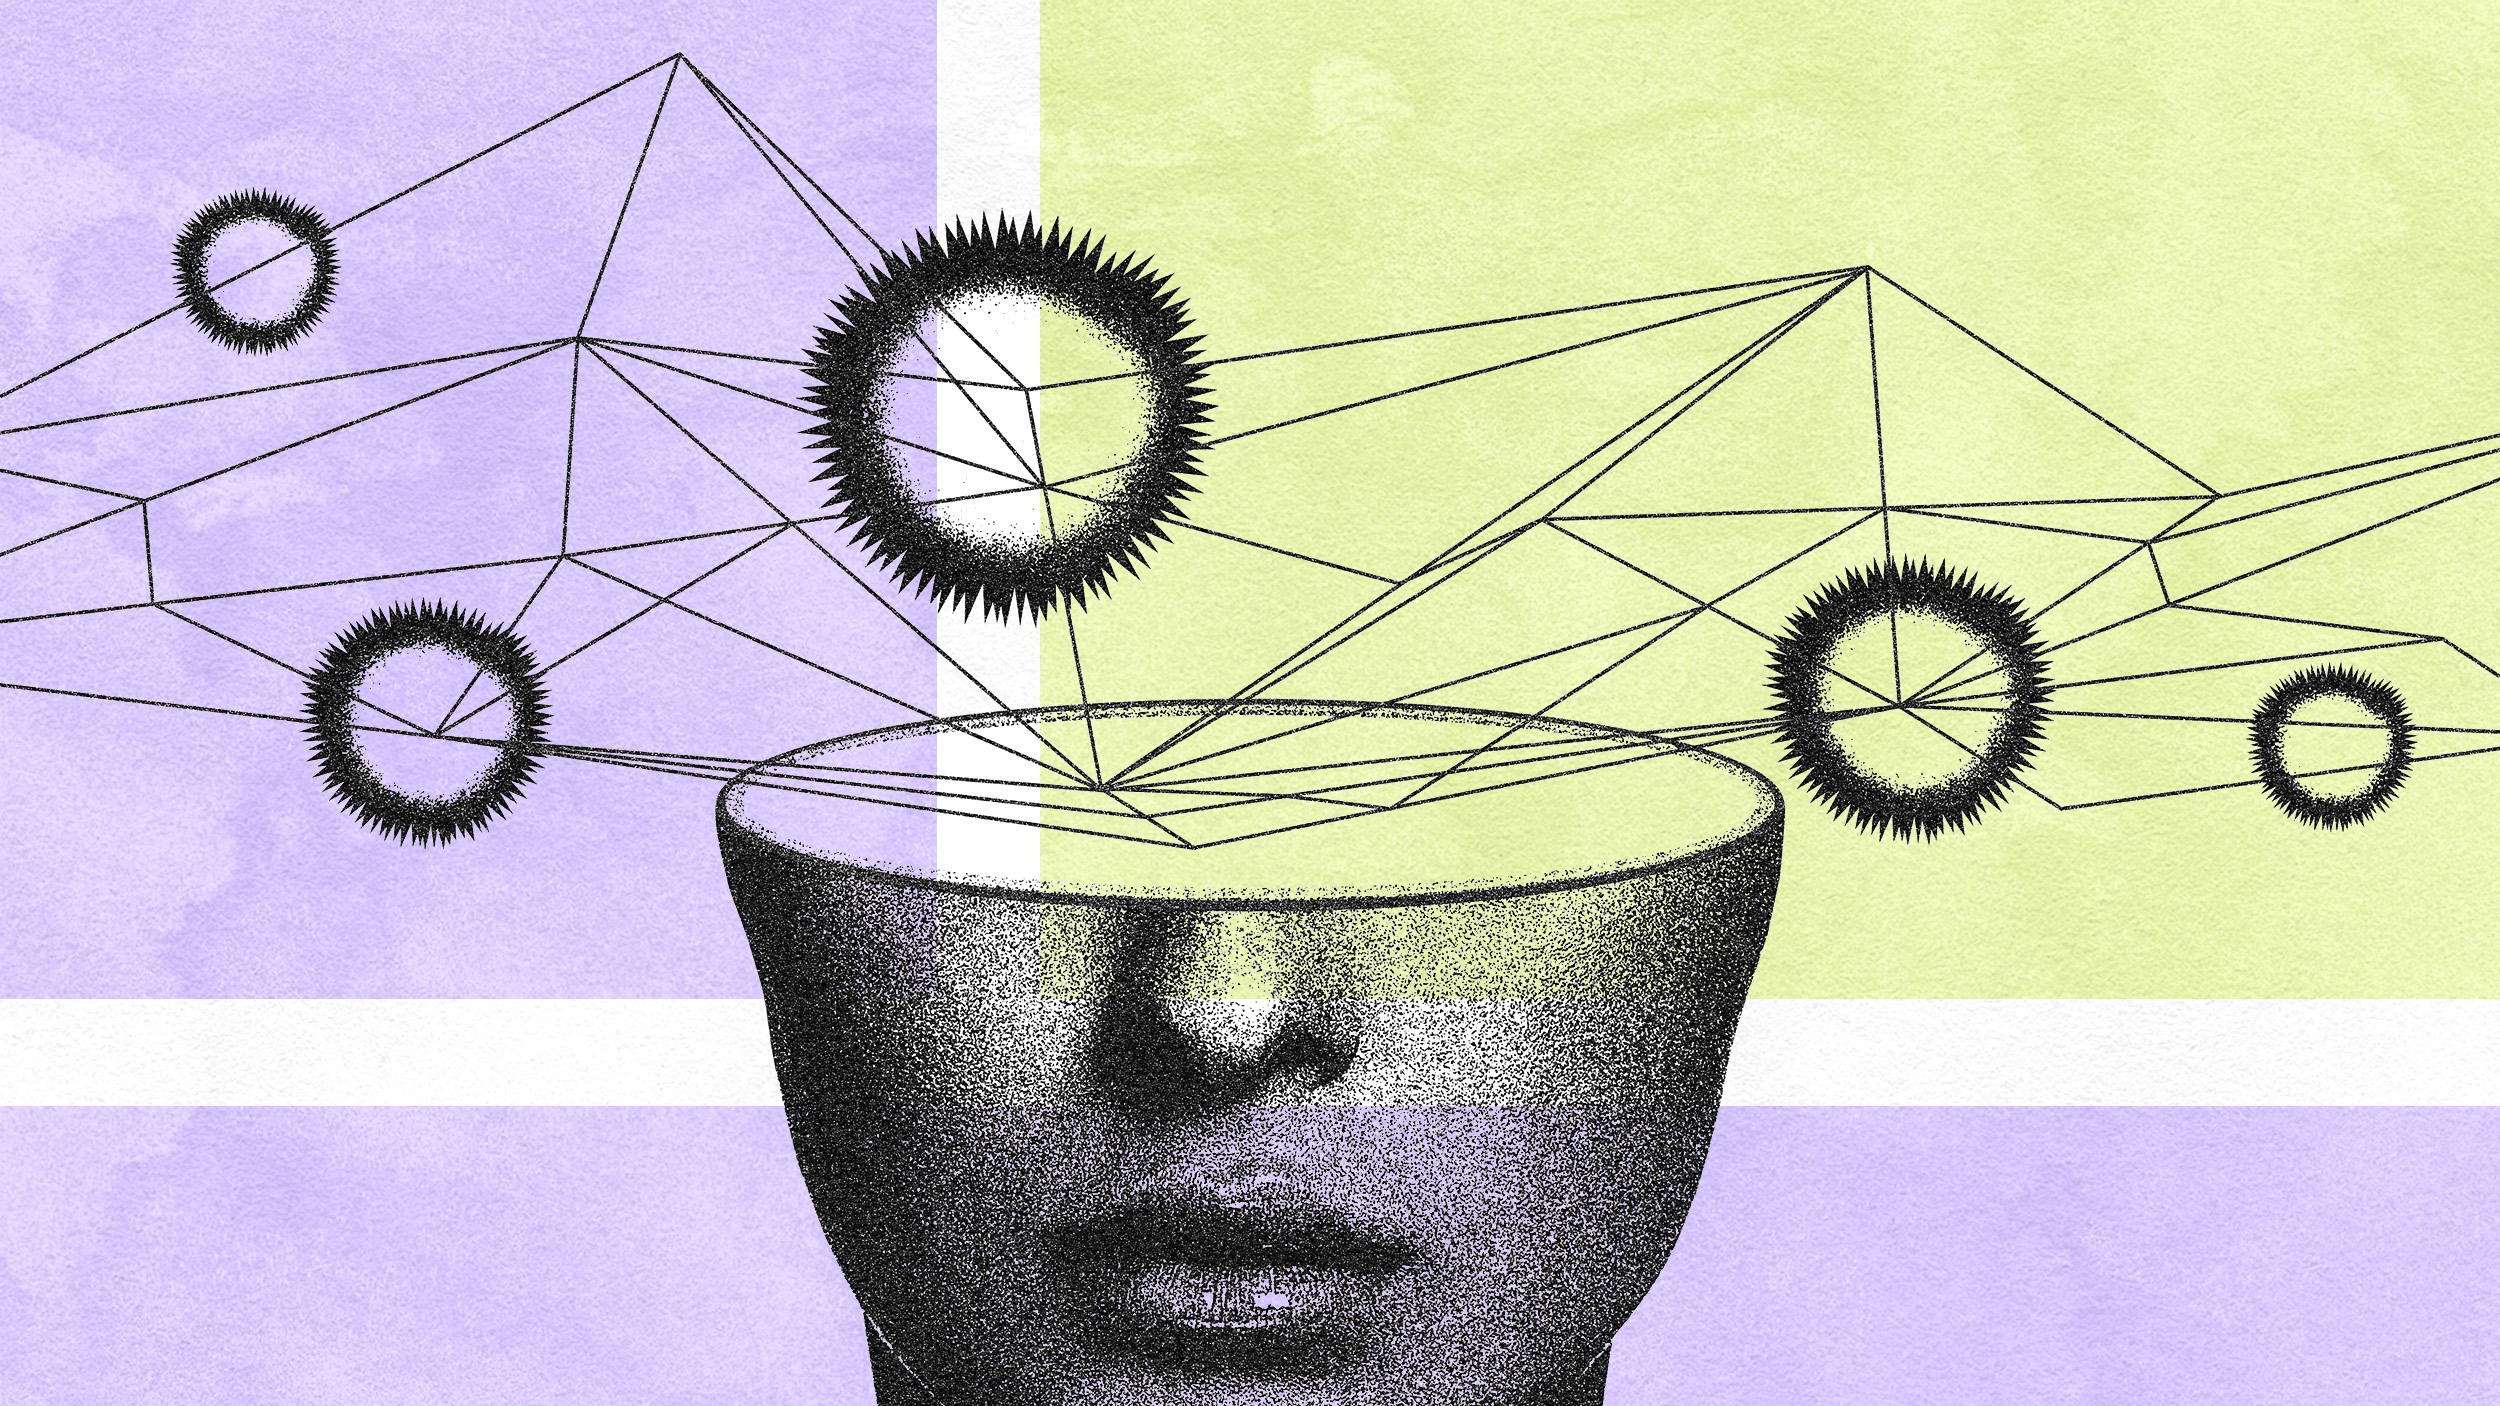 Abstract illustration of a partial human head with geometric shapes and interconnected lines extending from the top.